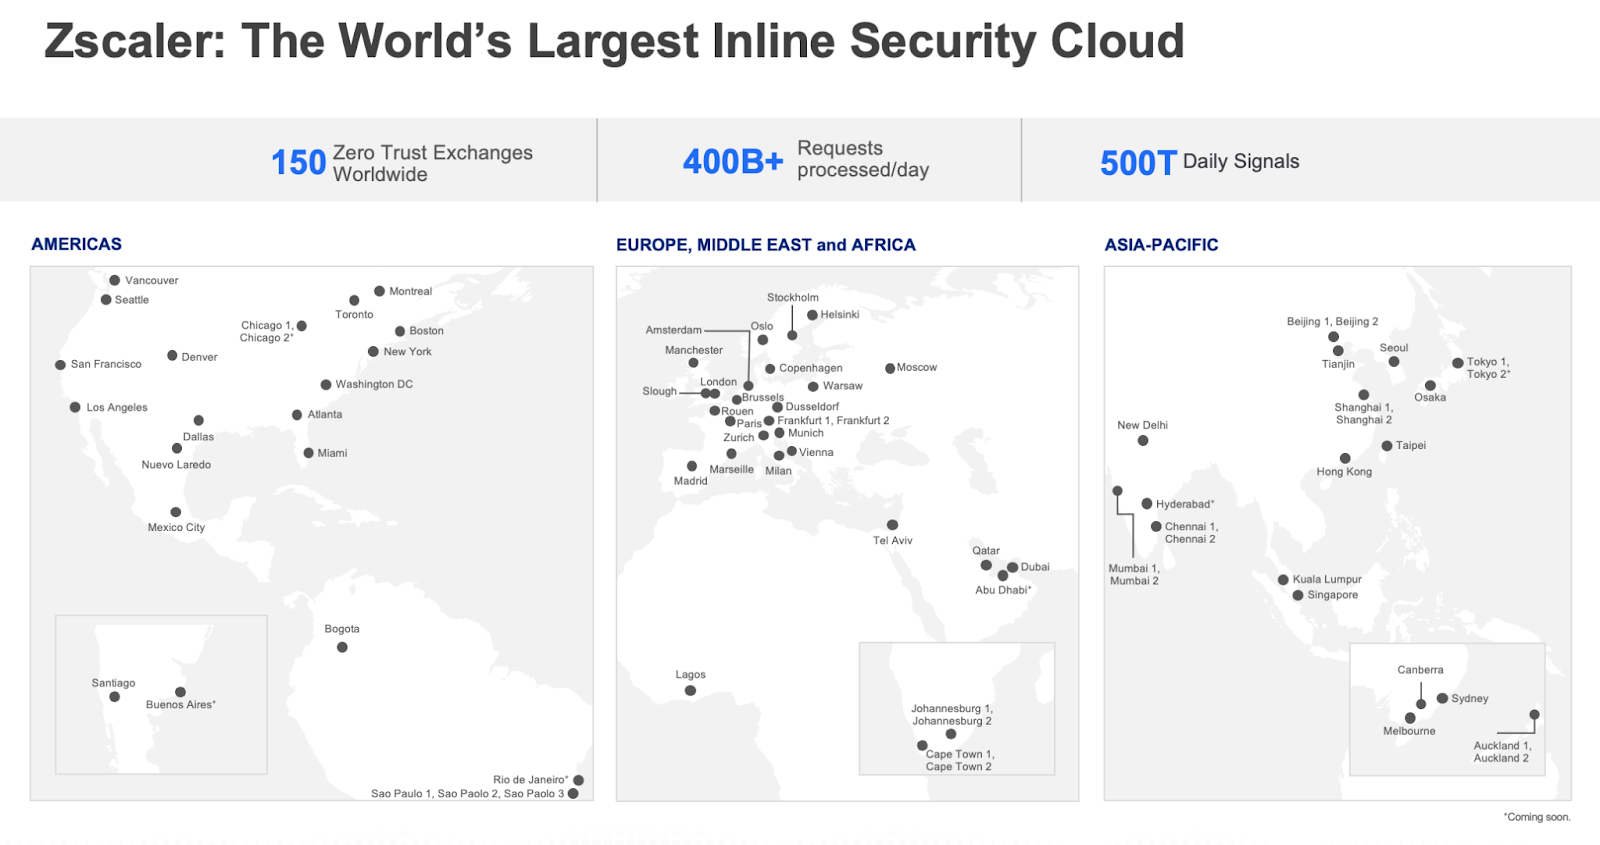 A snapshot of some of Zscaler’s data centers around the world